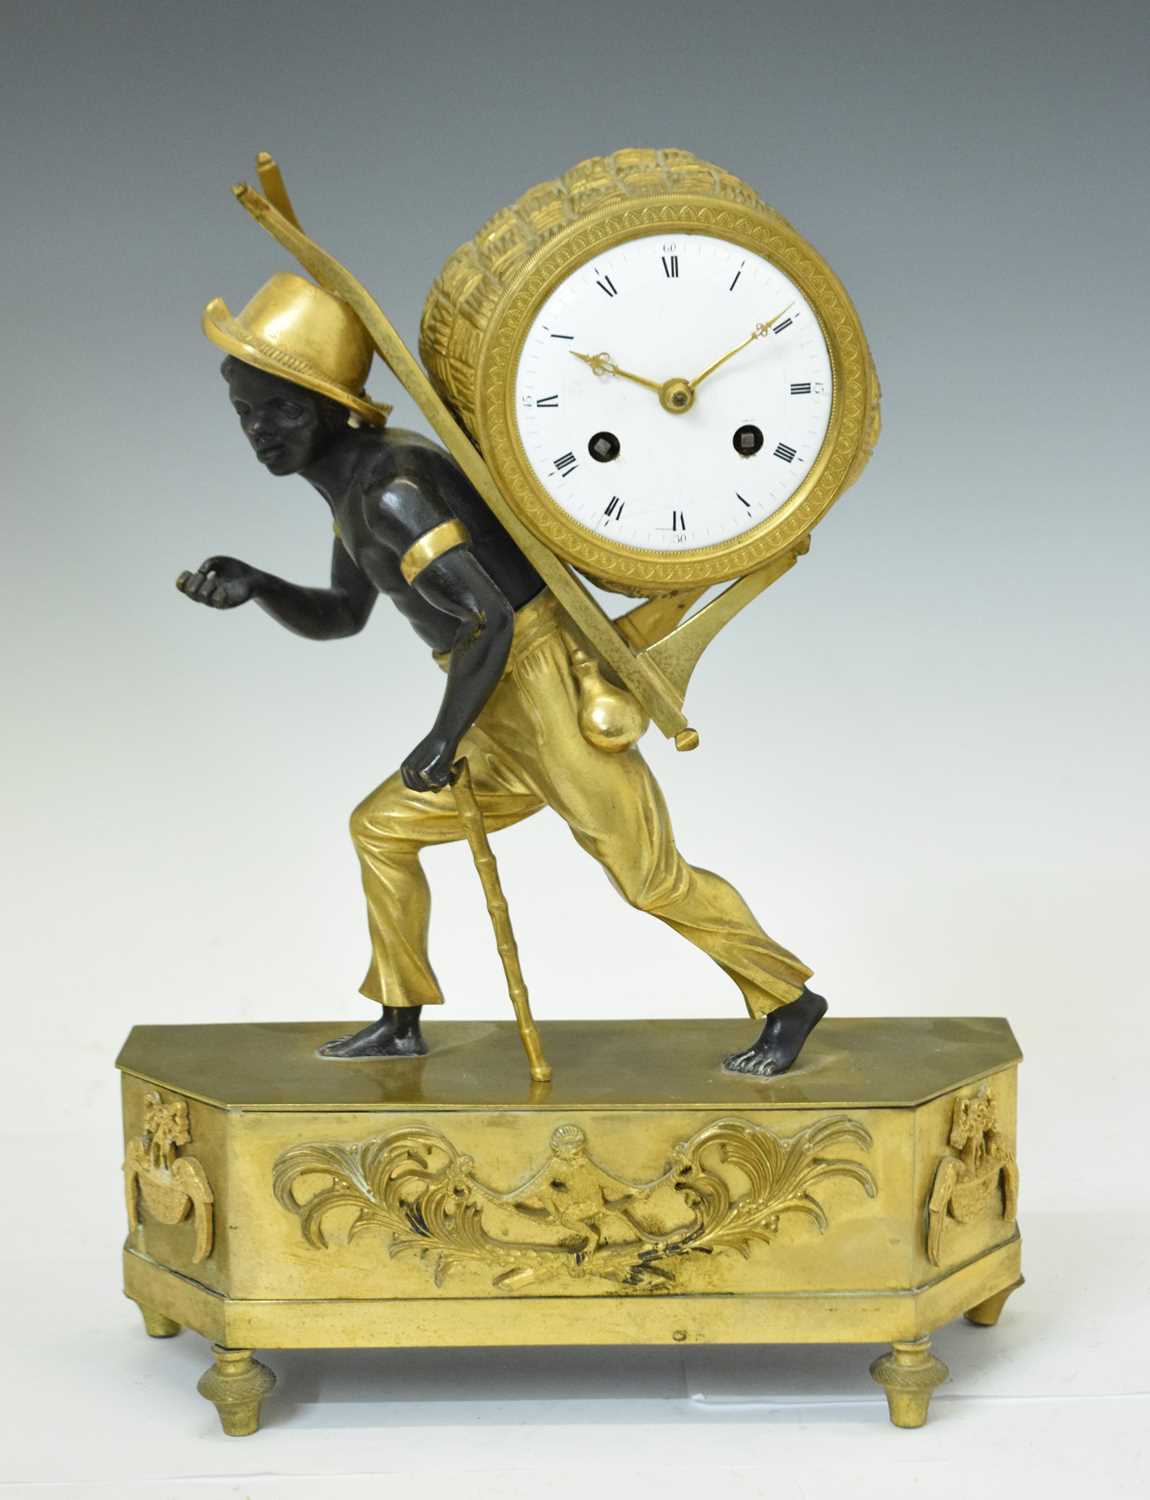 Early 19th century French Empire patinated bronze and ormolu figural mantel clock